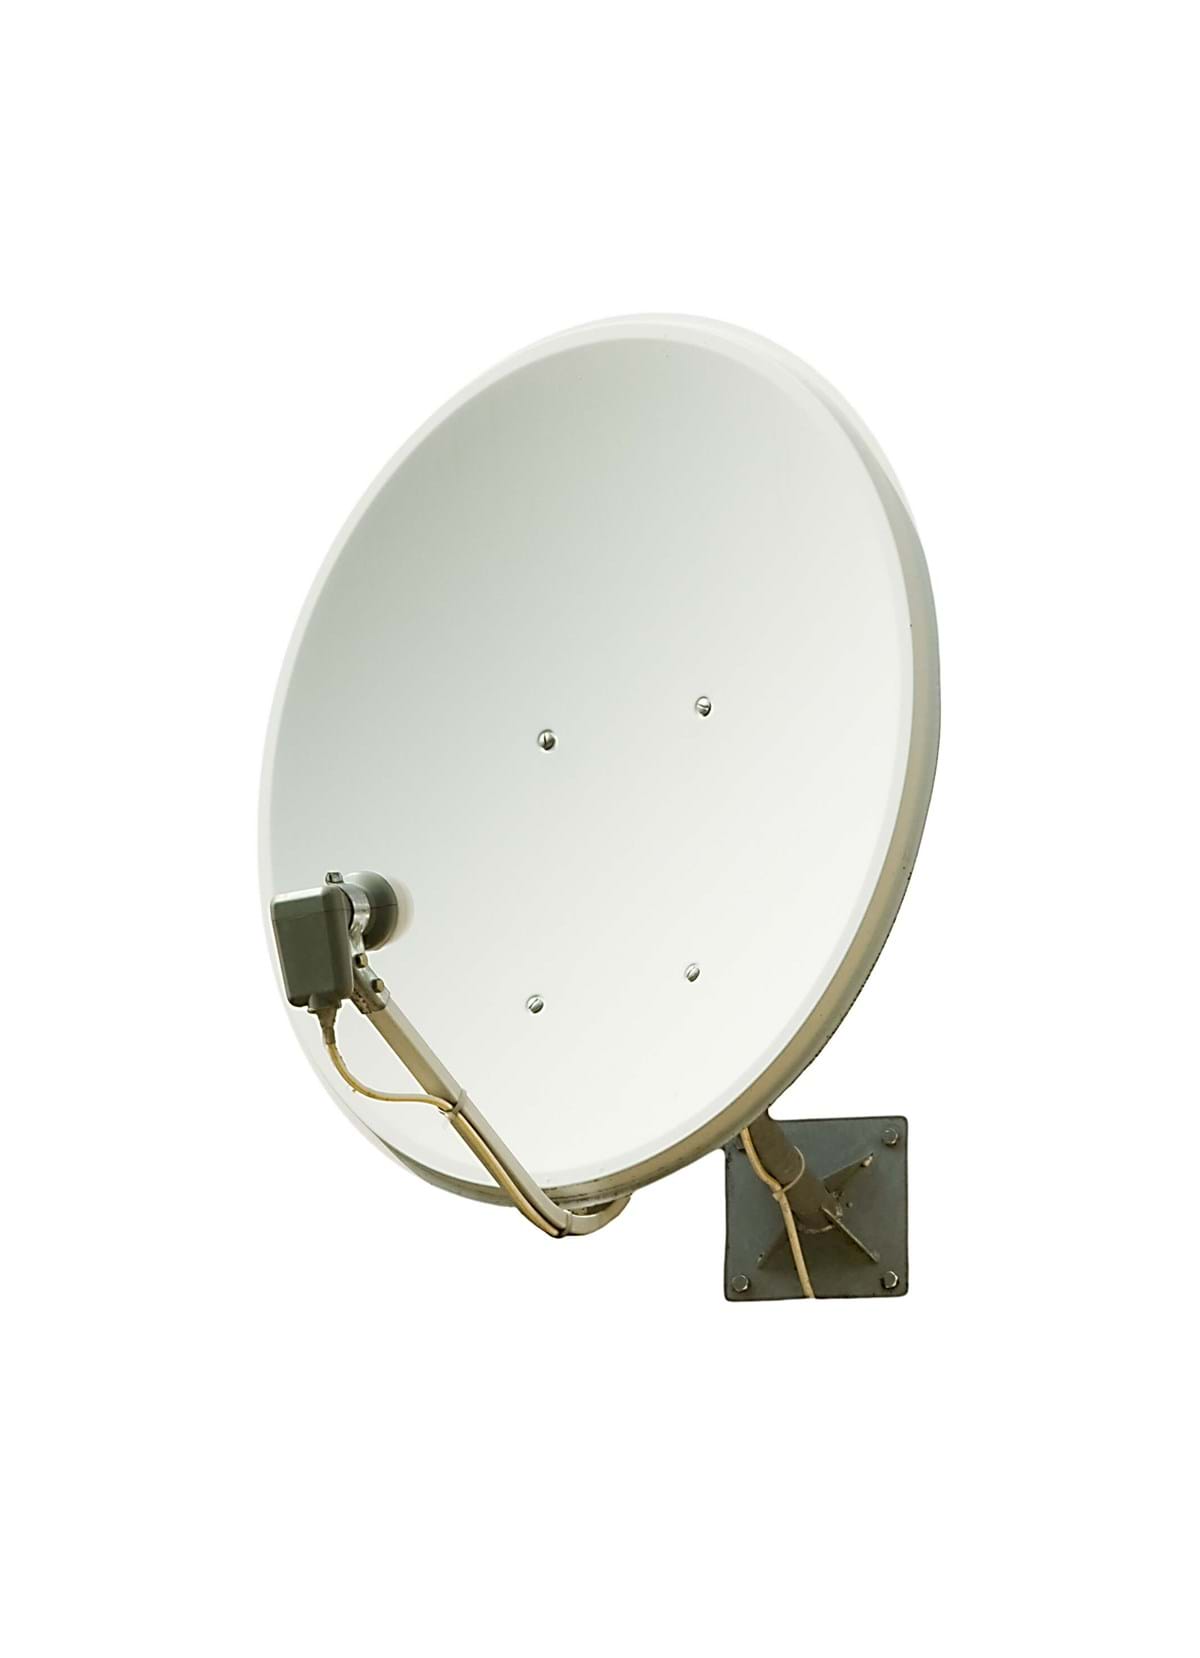 white satellite dish in front of white background